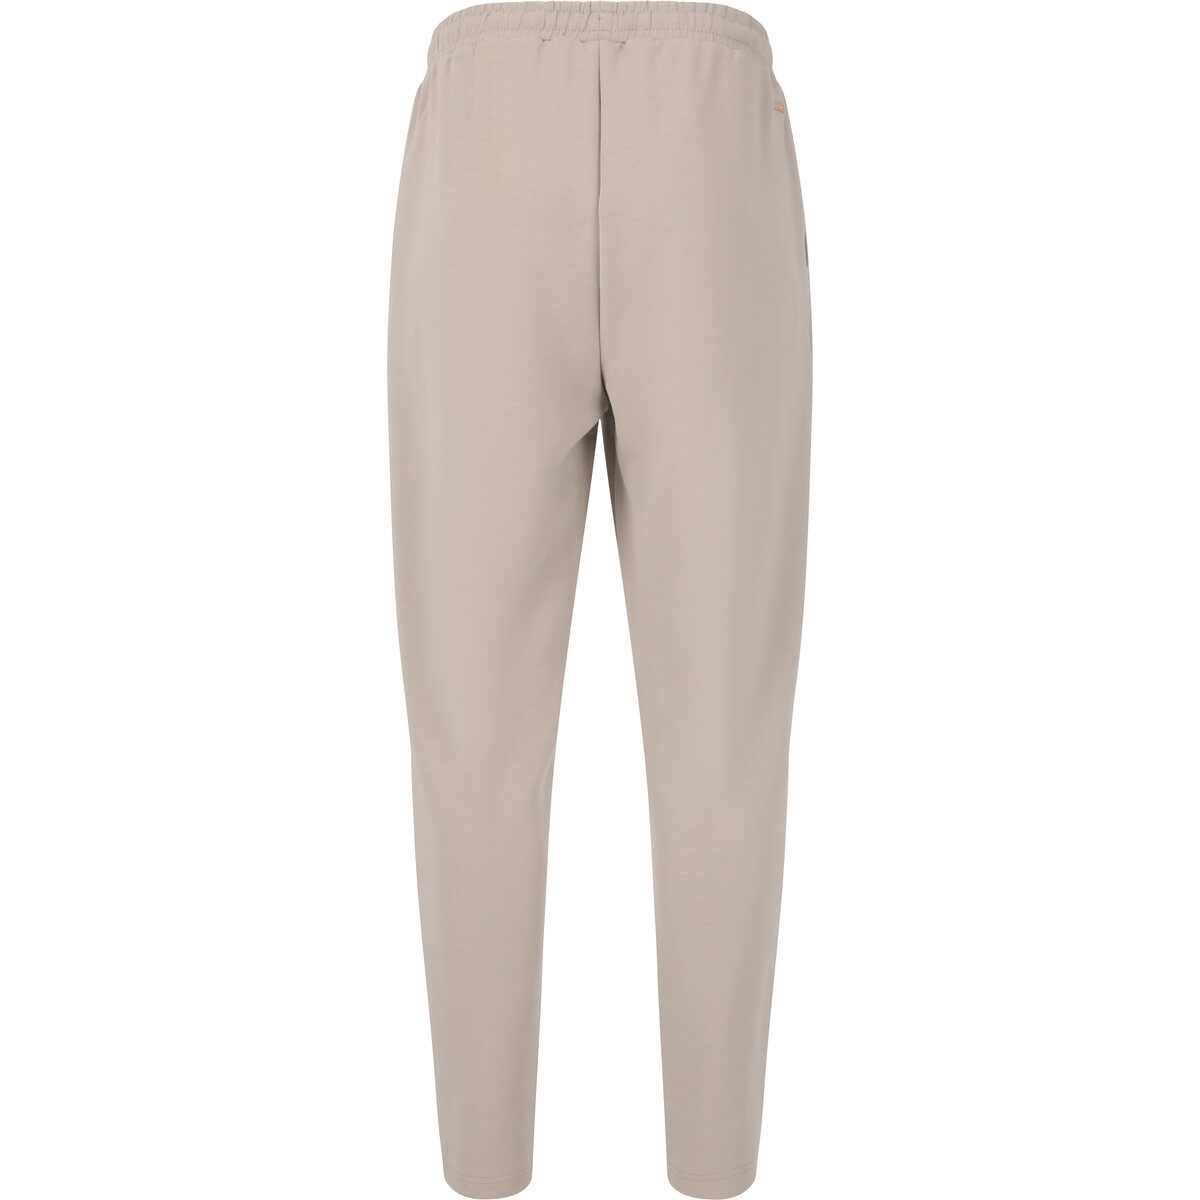 Athlecia Jacey V2 Womenswear Sweat Pants 9 Shaws Department Stores